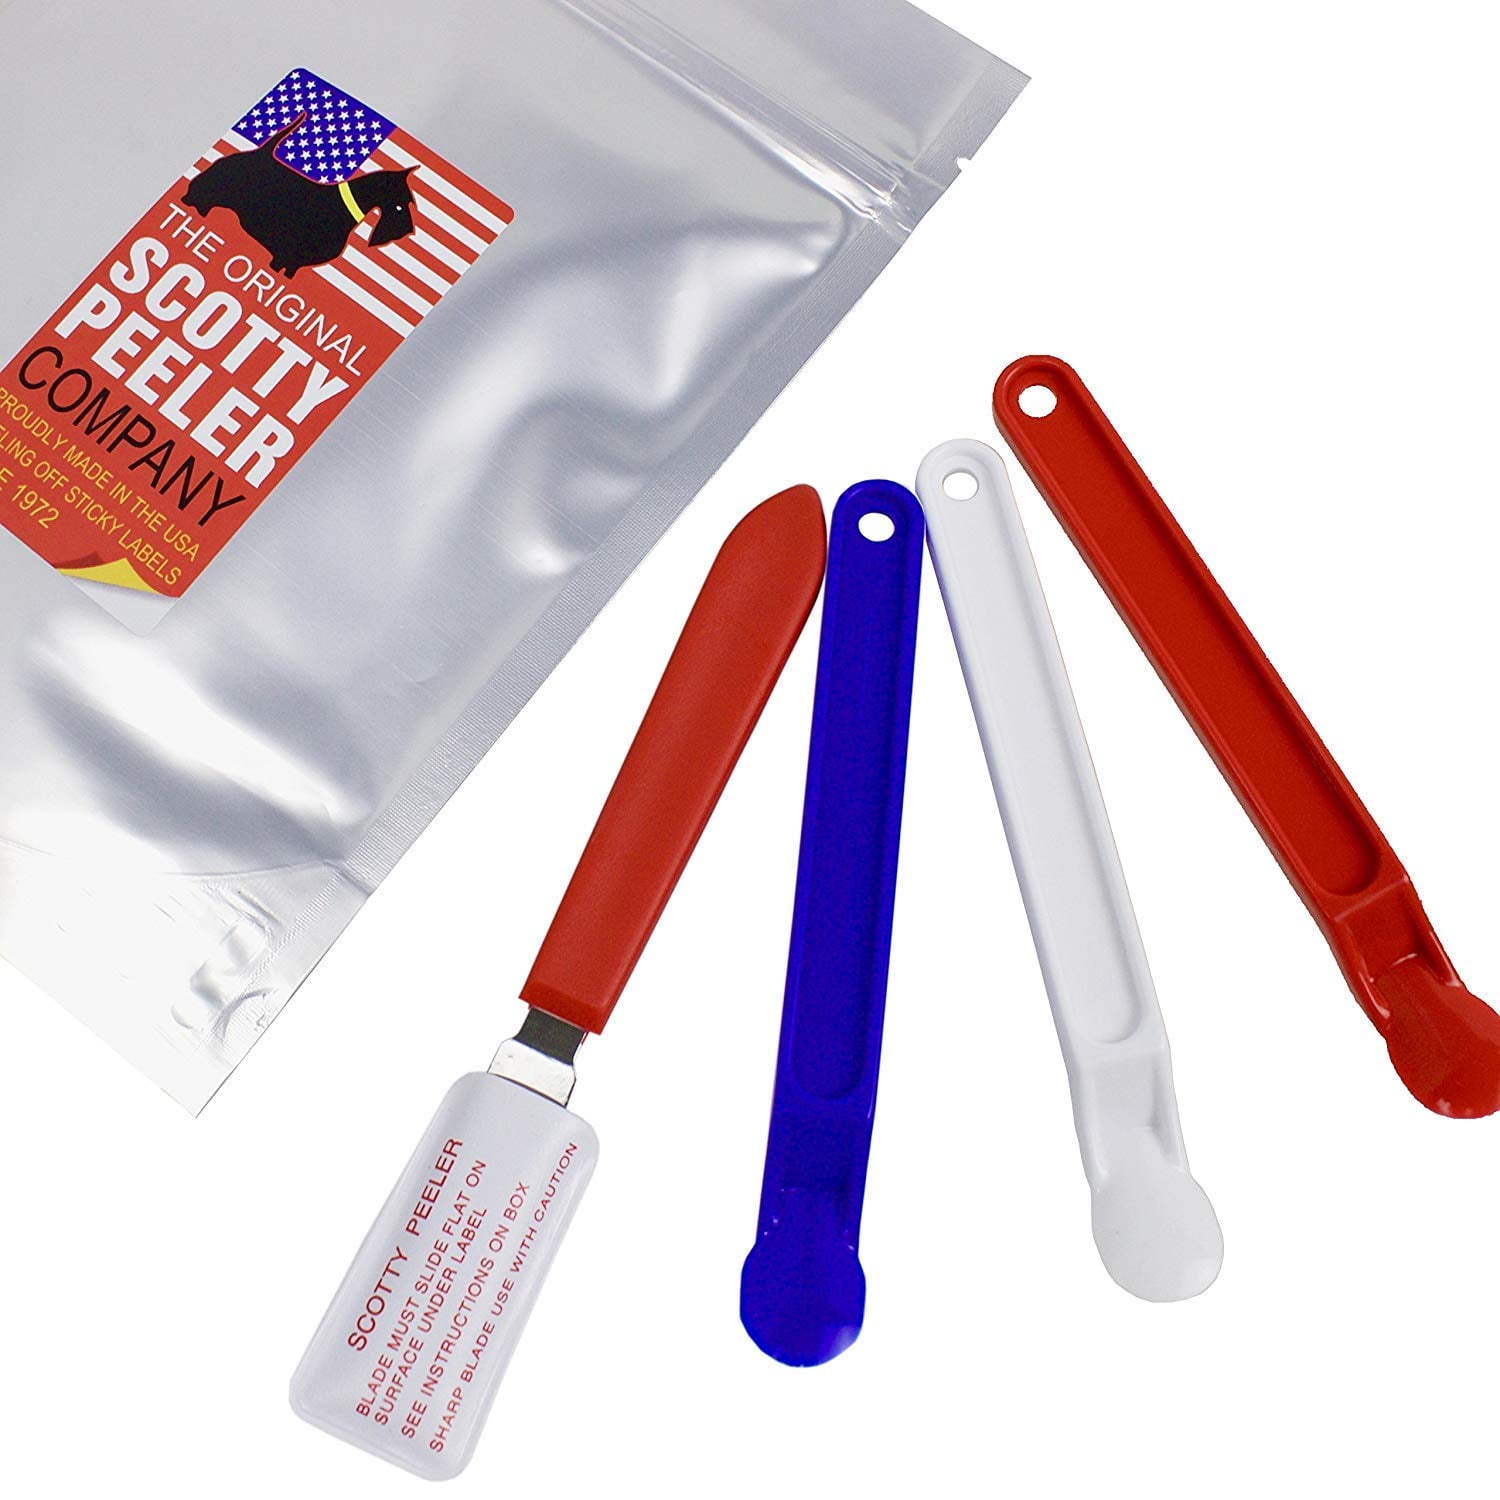 Scotty Peeler Single (RED) NEW (A Must Have for Anyone Removing  Stickers/Labels)